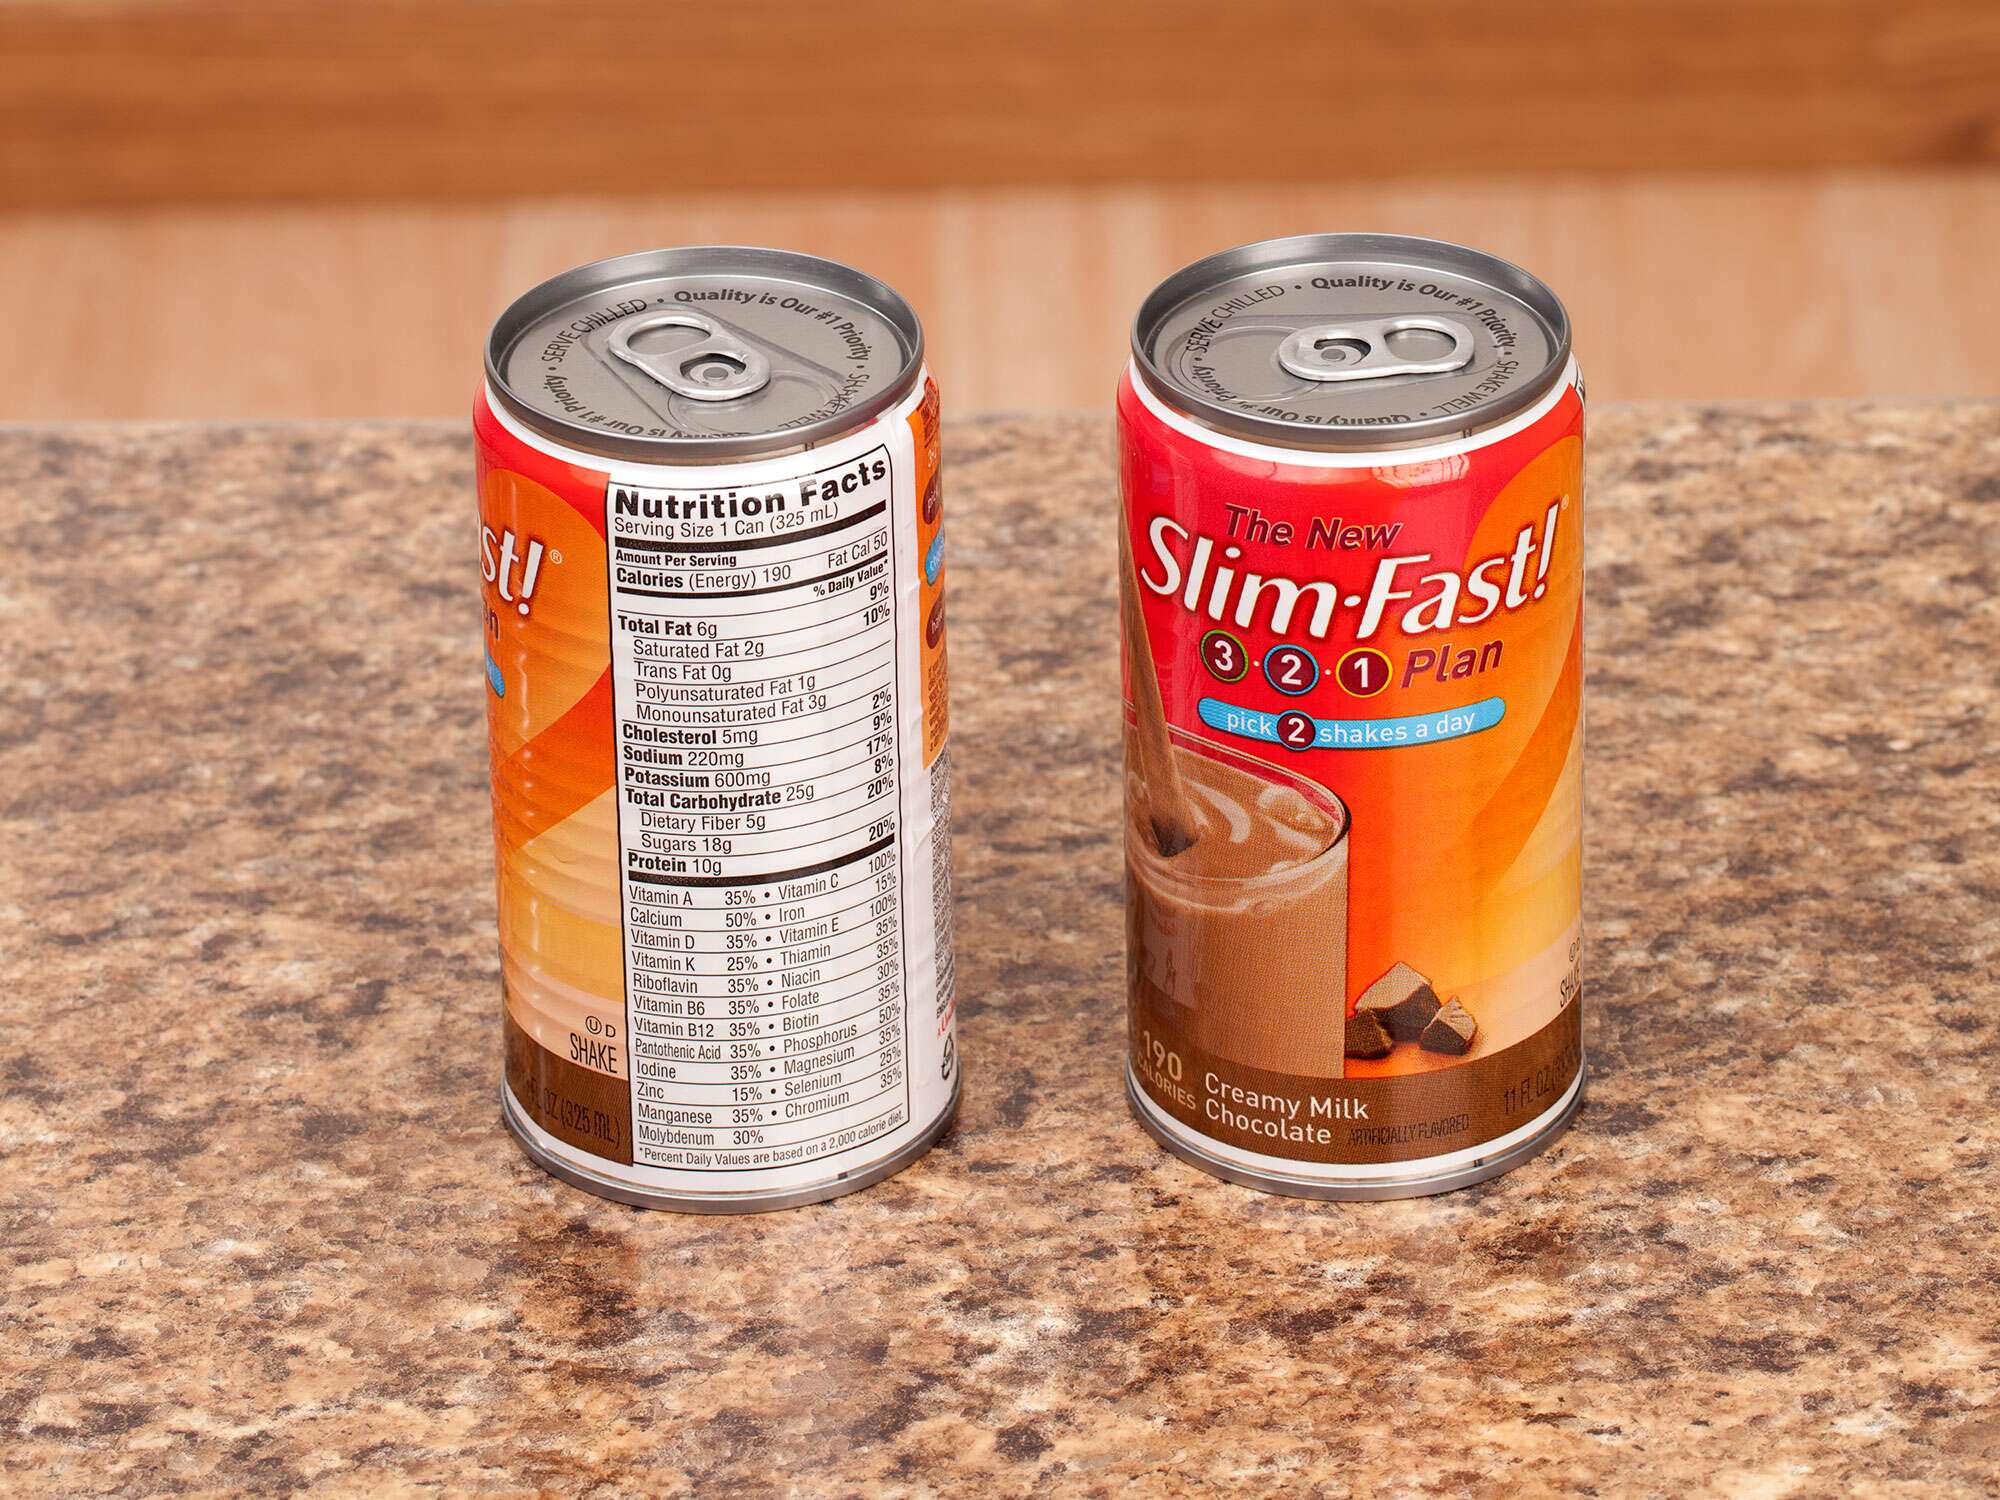 Let's Talk About SlimFast and How Bad It Is